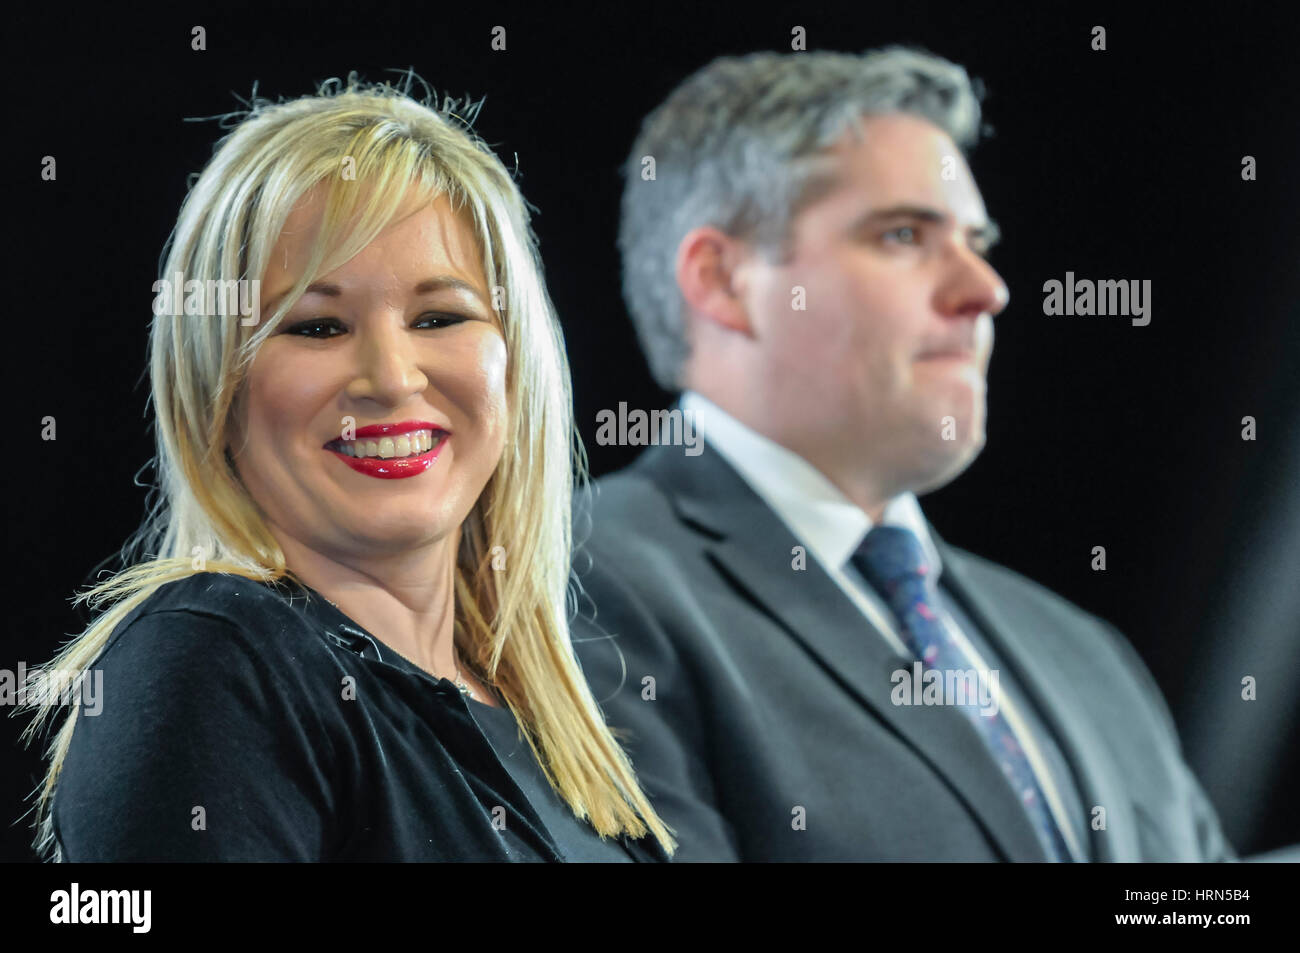 Belfast, Northern ireland. 03 Mar 2017 - Northern Ireland Assembly Election.  Michelle O'Neill (Sinn Fein) smiles as she sits beside the DUP's Gavin Robinson MP. Stock Photo